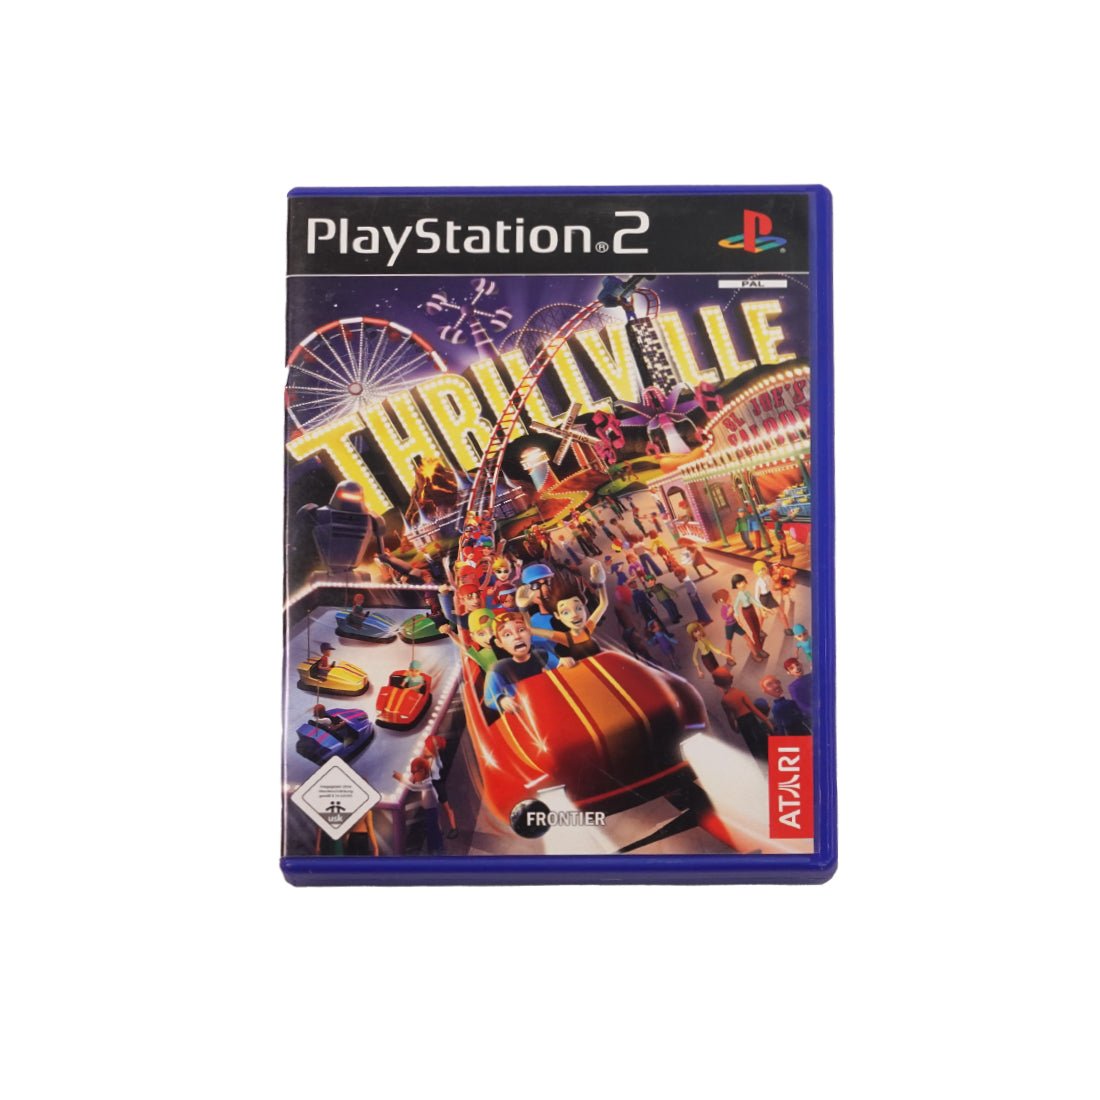 (Pre-Owned) ThrillVille - PlayStation 2 - Store 974 | ستور ٩٧٤